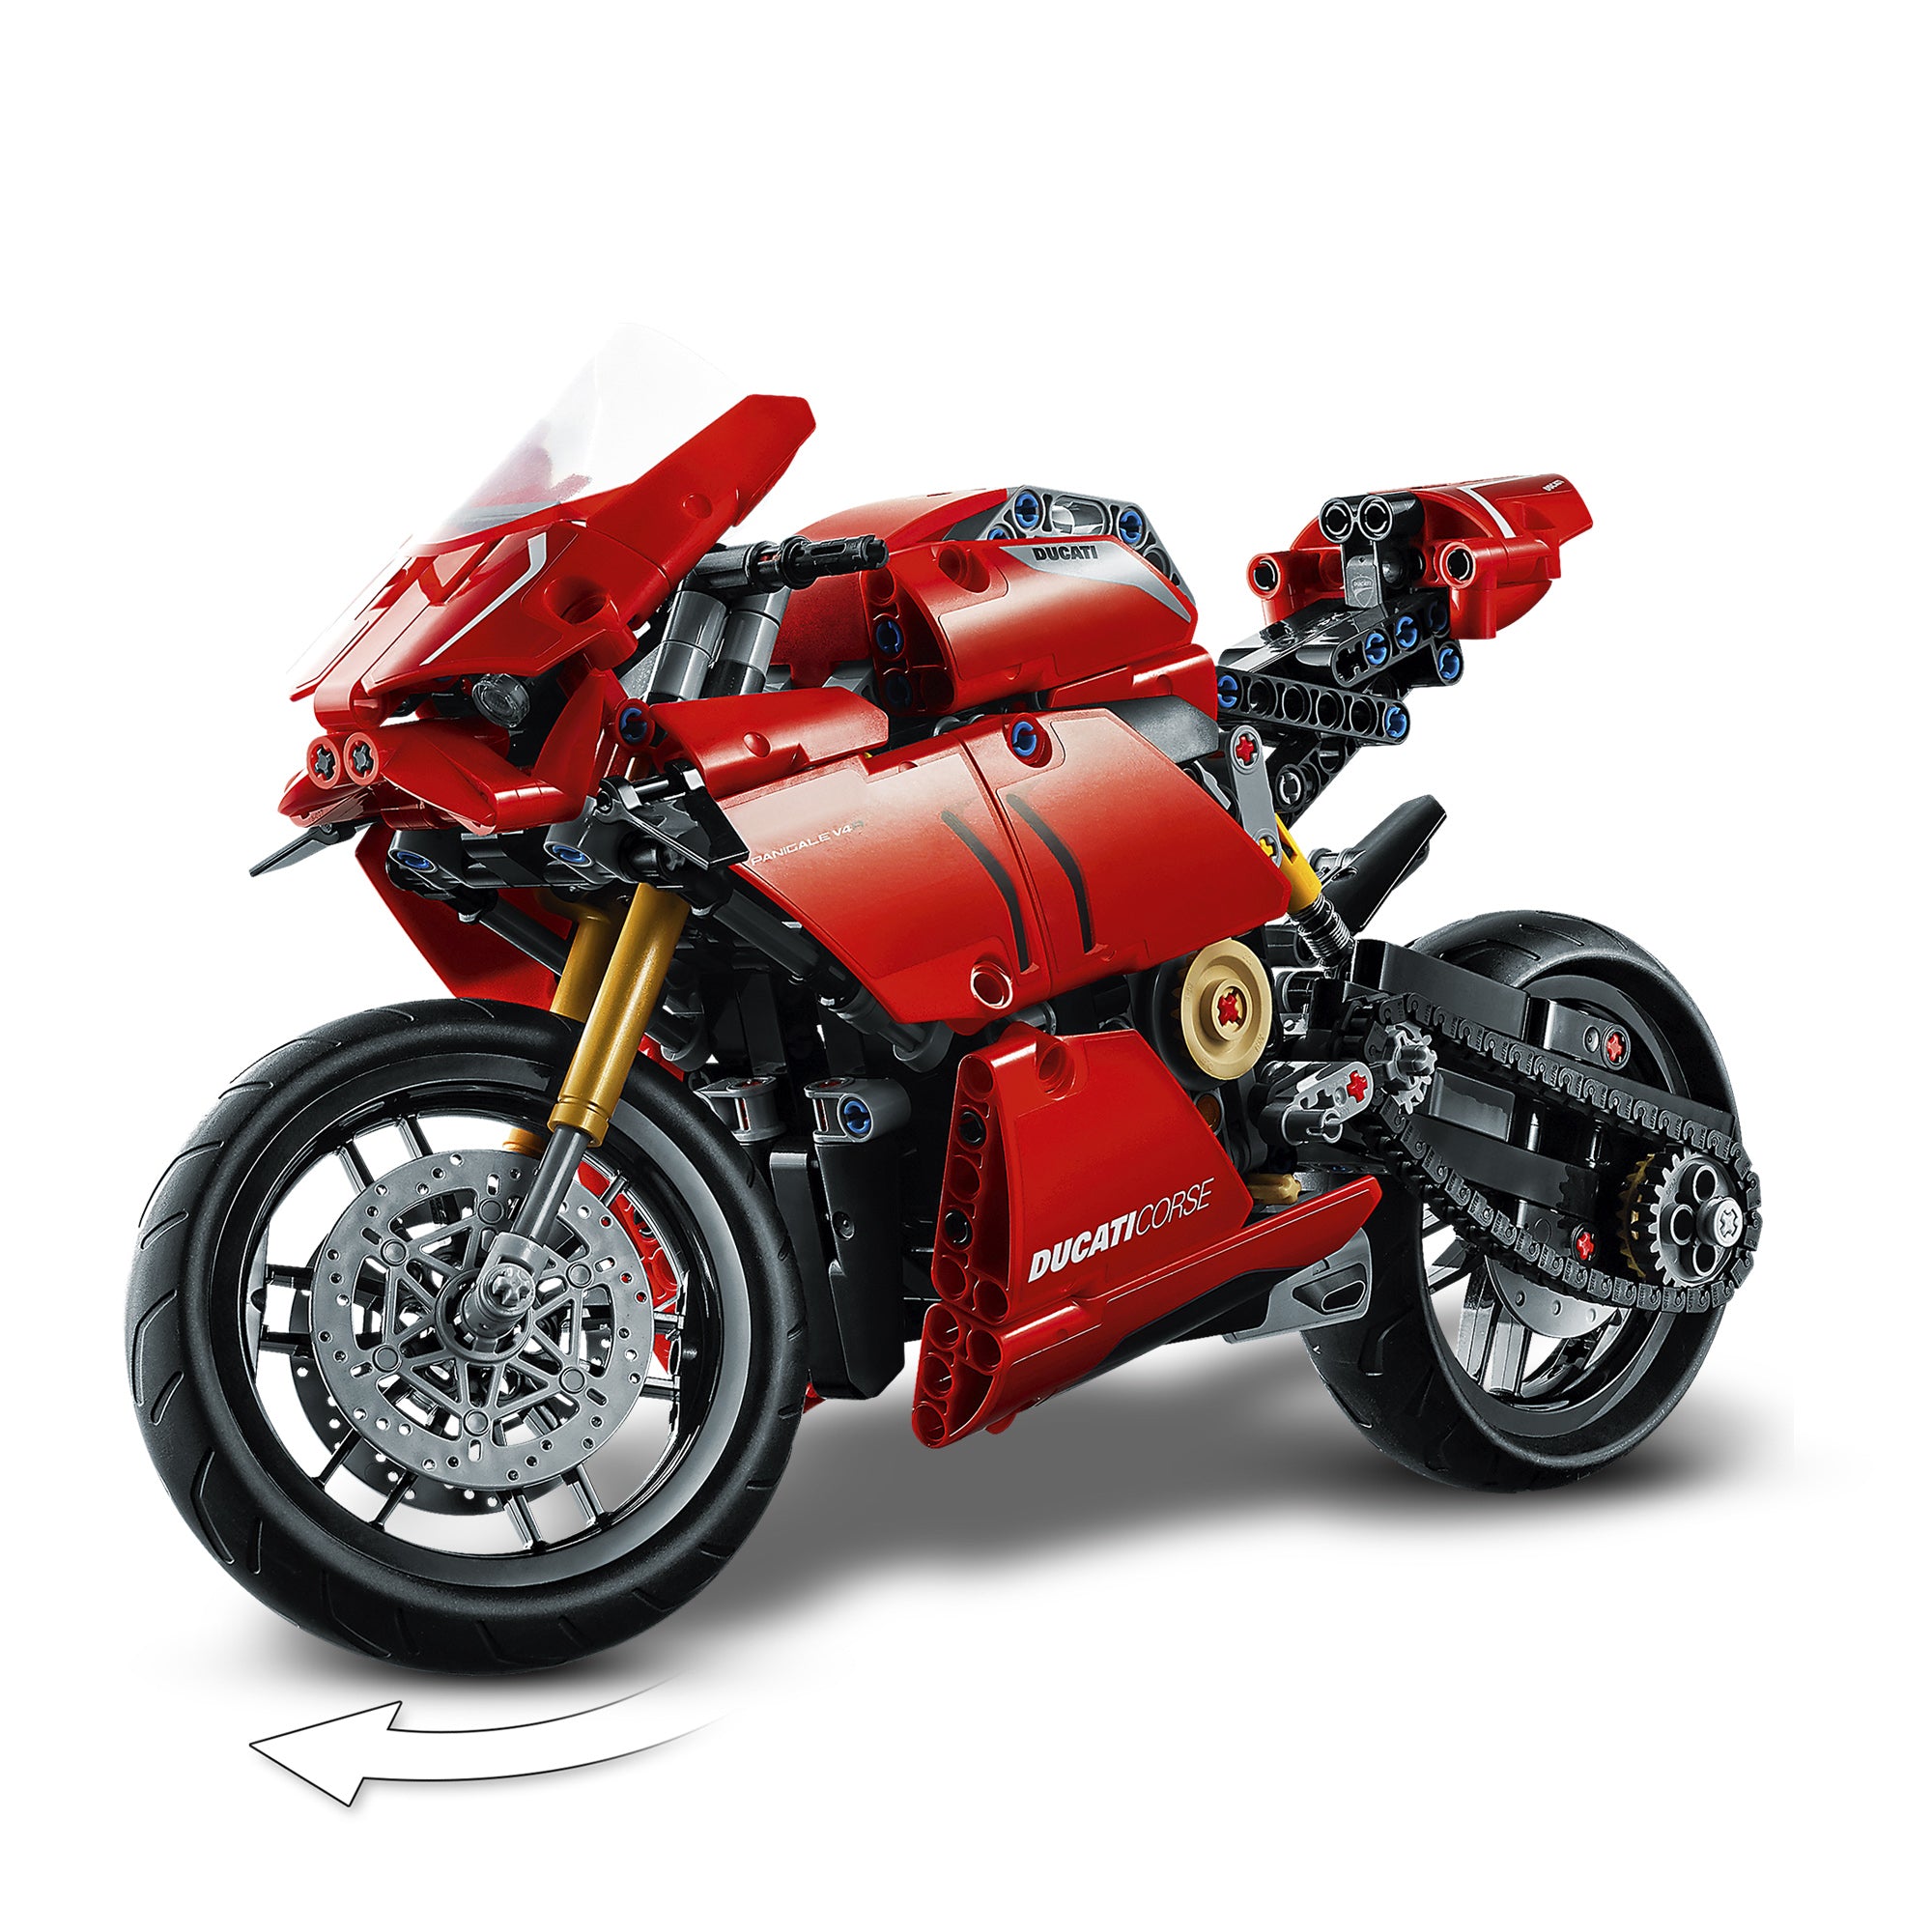 LEGO 42107 Technic Ducati Panigale V4 R Motorbike, Collectible Superbike Display Model